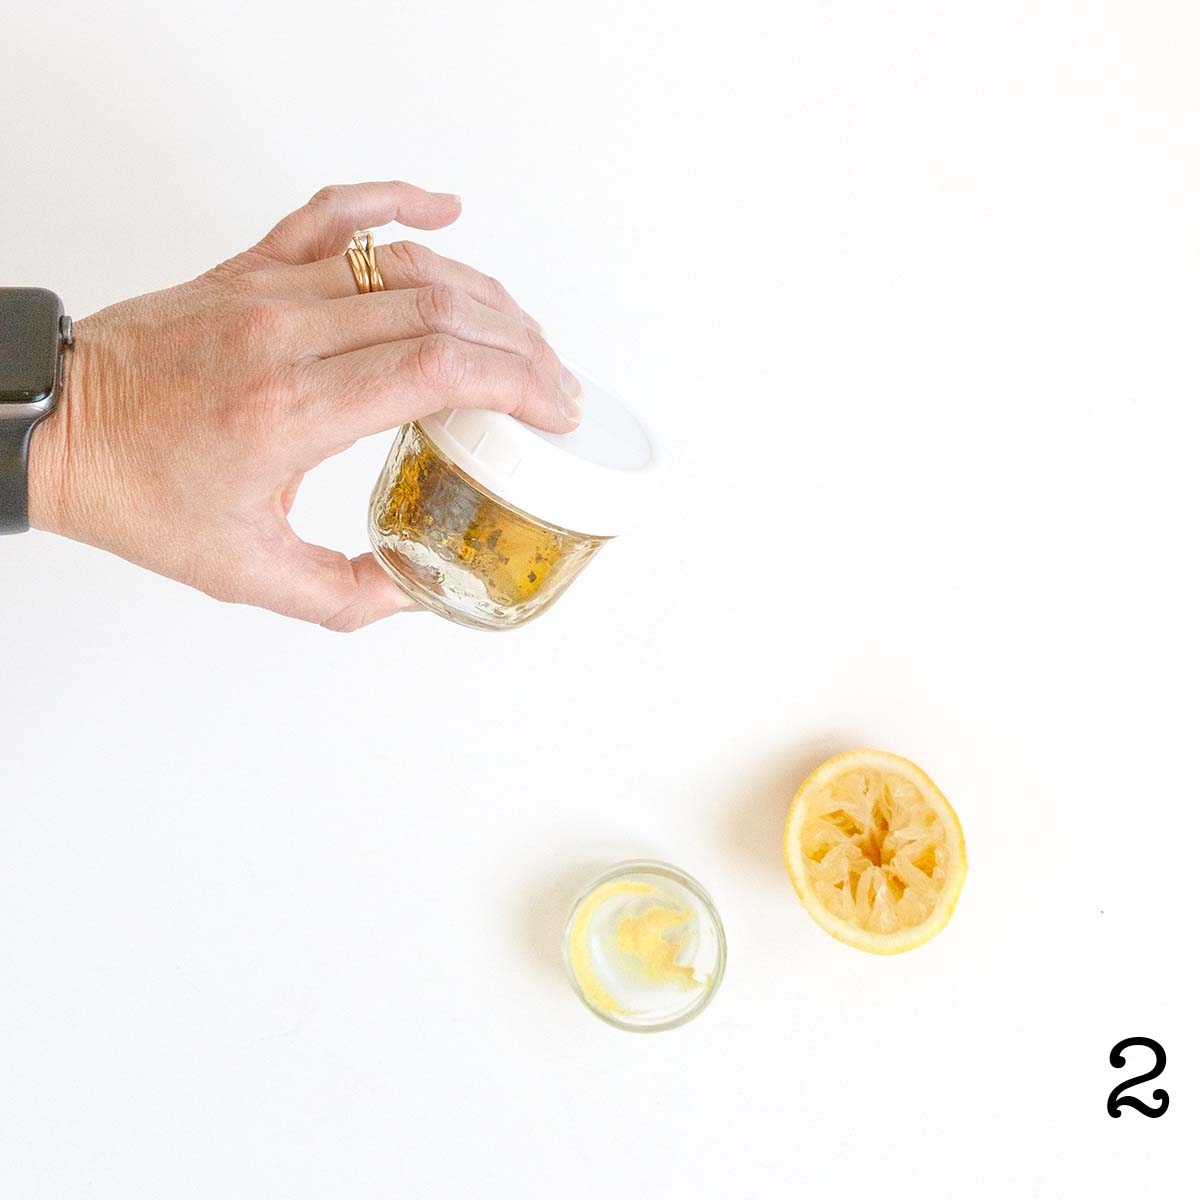 A person shaking up a jar of lemon thyme vinaigrette next to a squeeze half lemon and an empty dish of Dijon mustard.